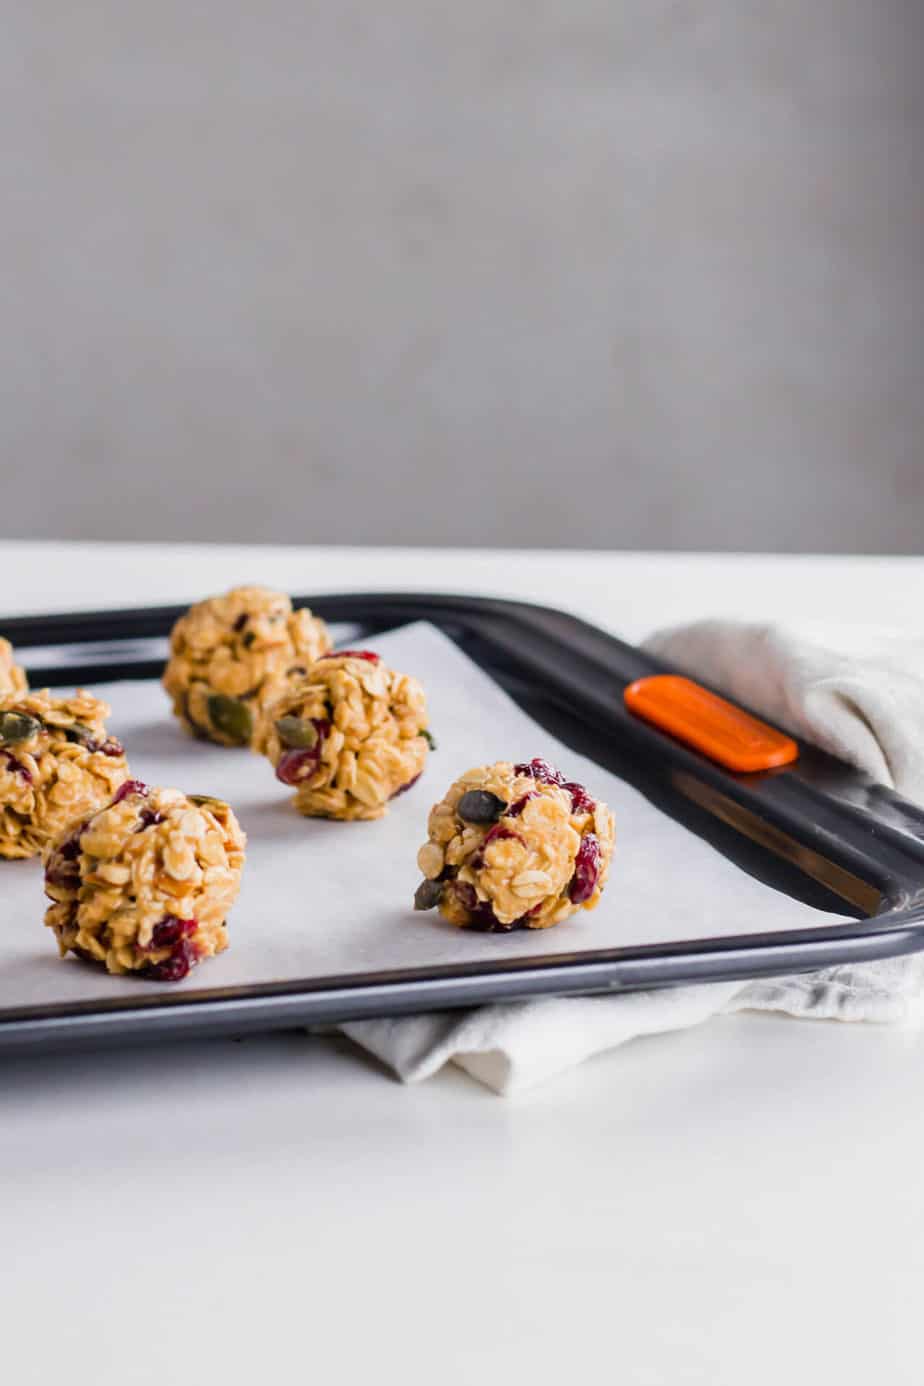 Healthy oat bliss balls with cranberries on a baking tray lined with parchment paper.